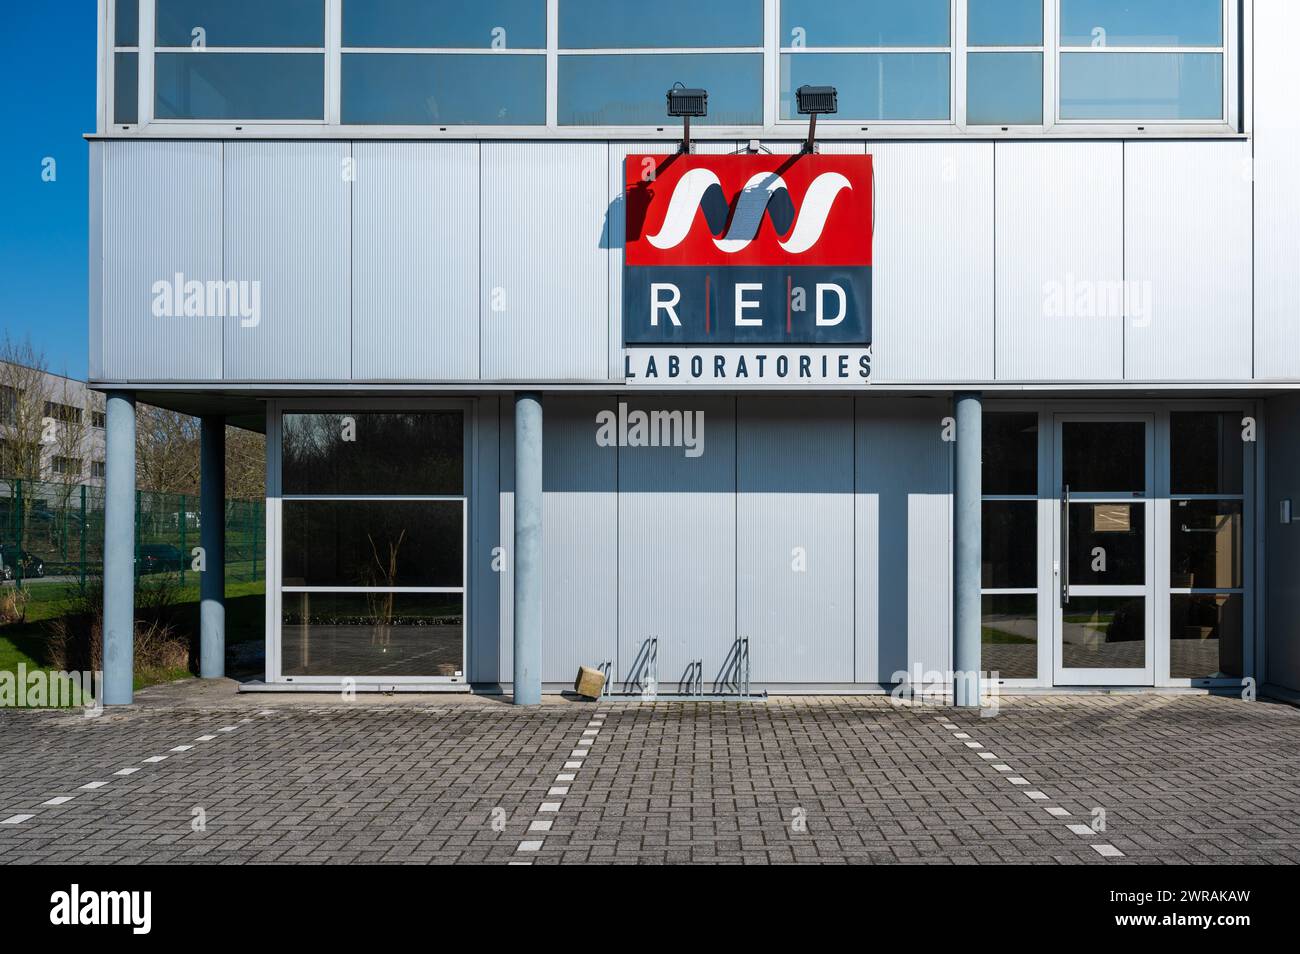 Zellik, Flemish Brabant, Belgium March 8, 2024 - Facade of the RED laboratories, doing research on long term diseases Stock Photo